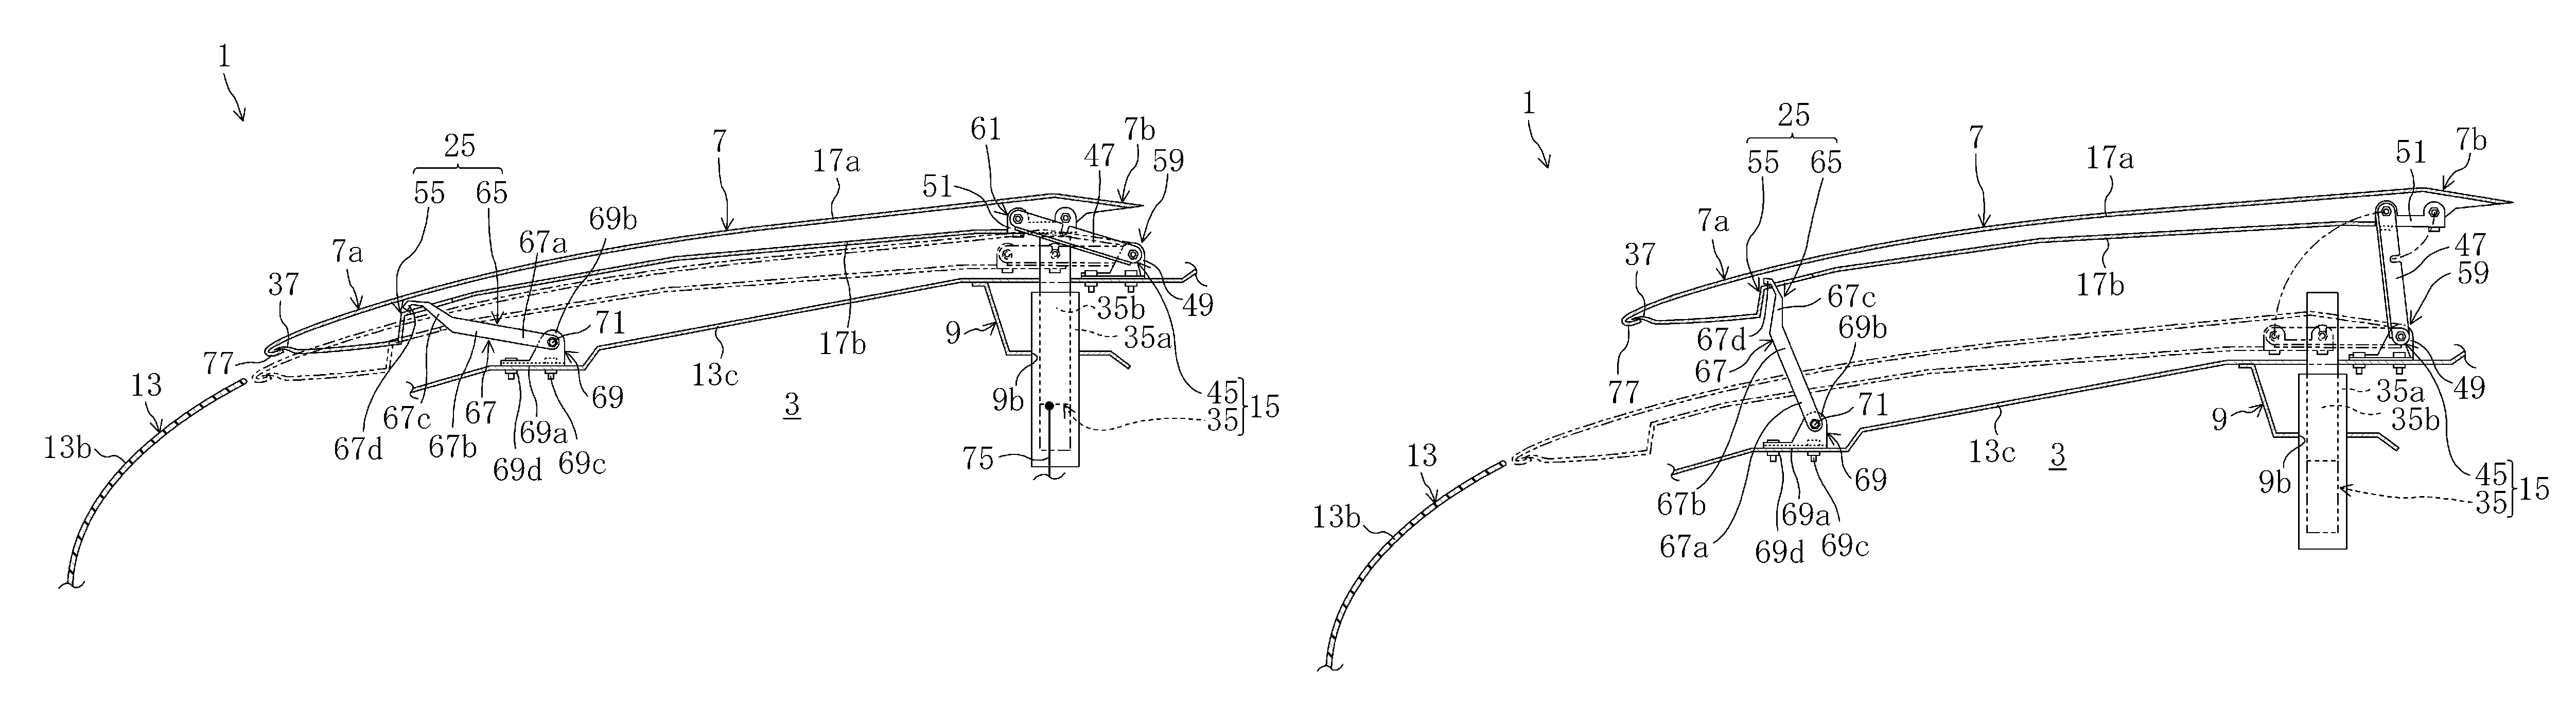 Pedestrian protection device for vehicle